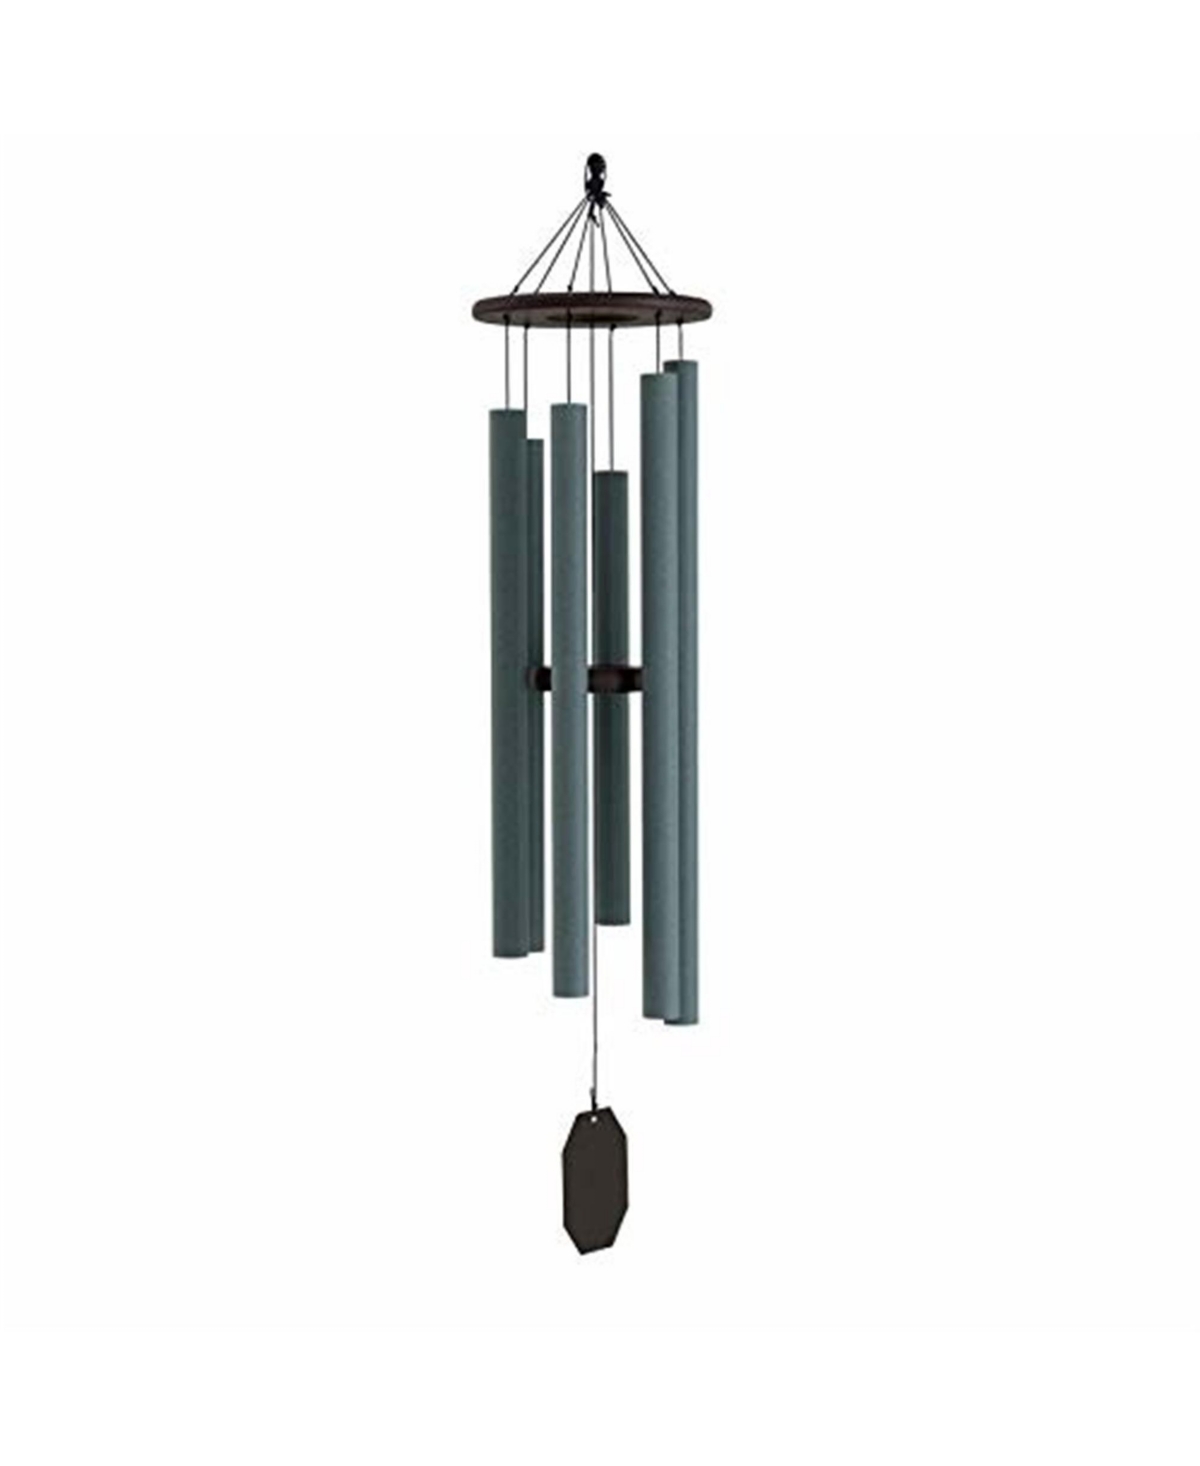 Lambright Chimes Serenity Wind Chime Amish Crafted Chime, 48in